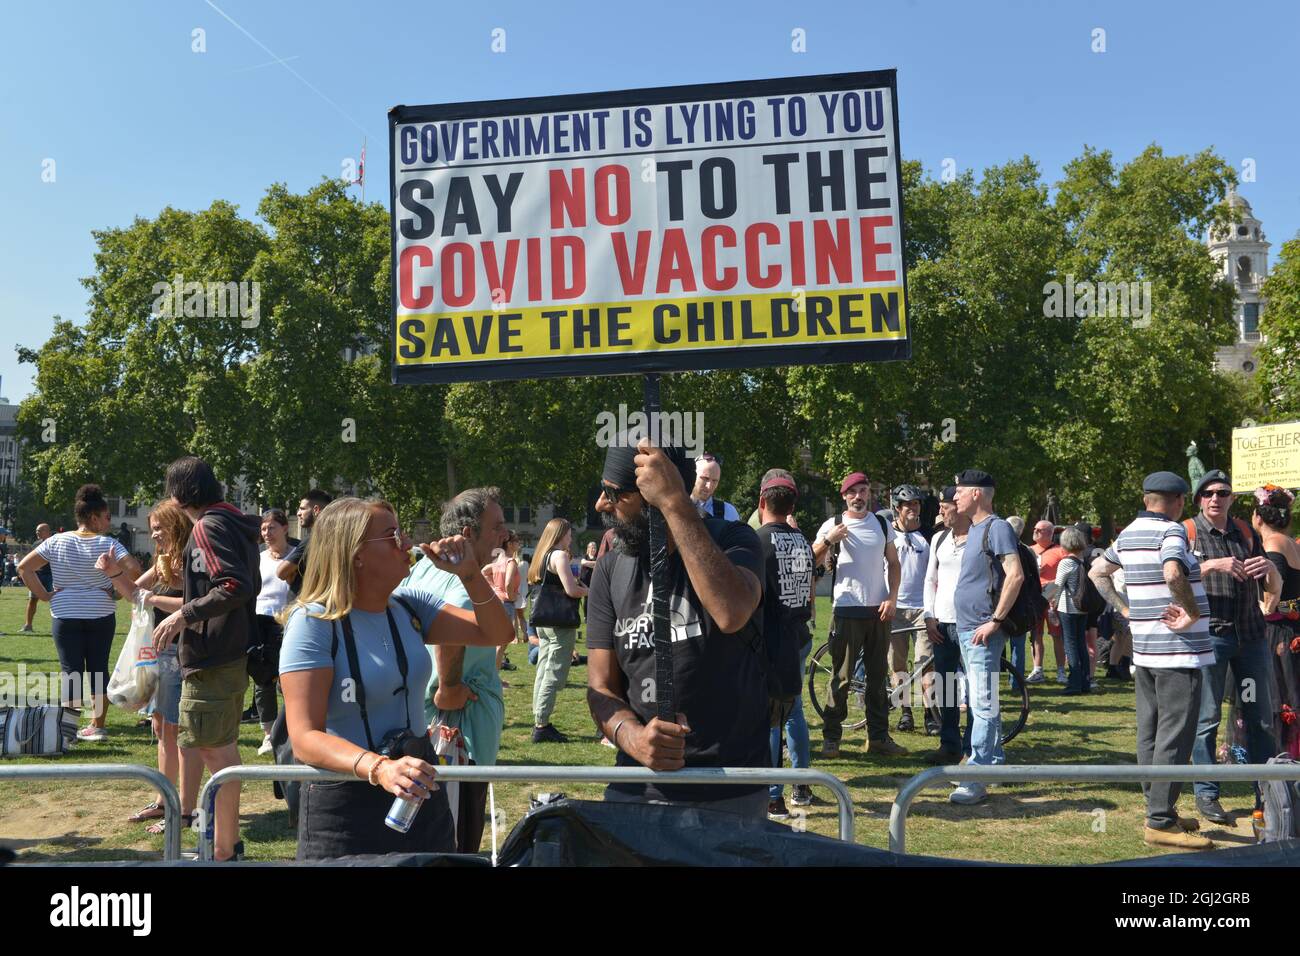 Anti-government rally in London. A small group of conspiracy theorists and anti- government activists gathered at Parliament Square to oppose UK Covid restrictions, vaccinations and Covid vaccination passports. Stock Photo